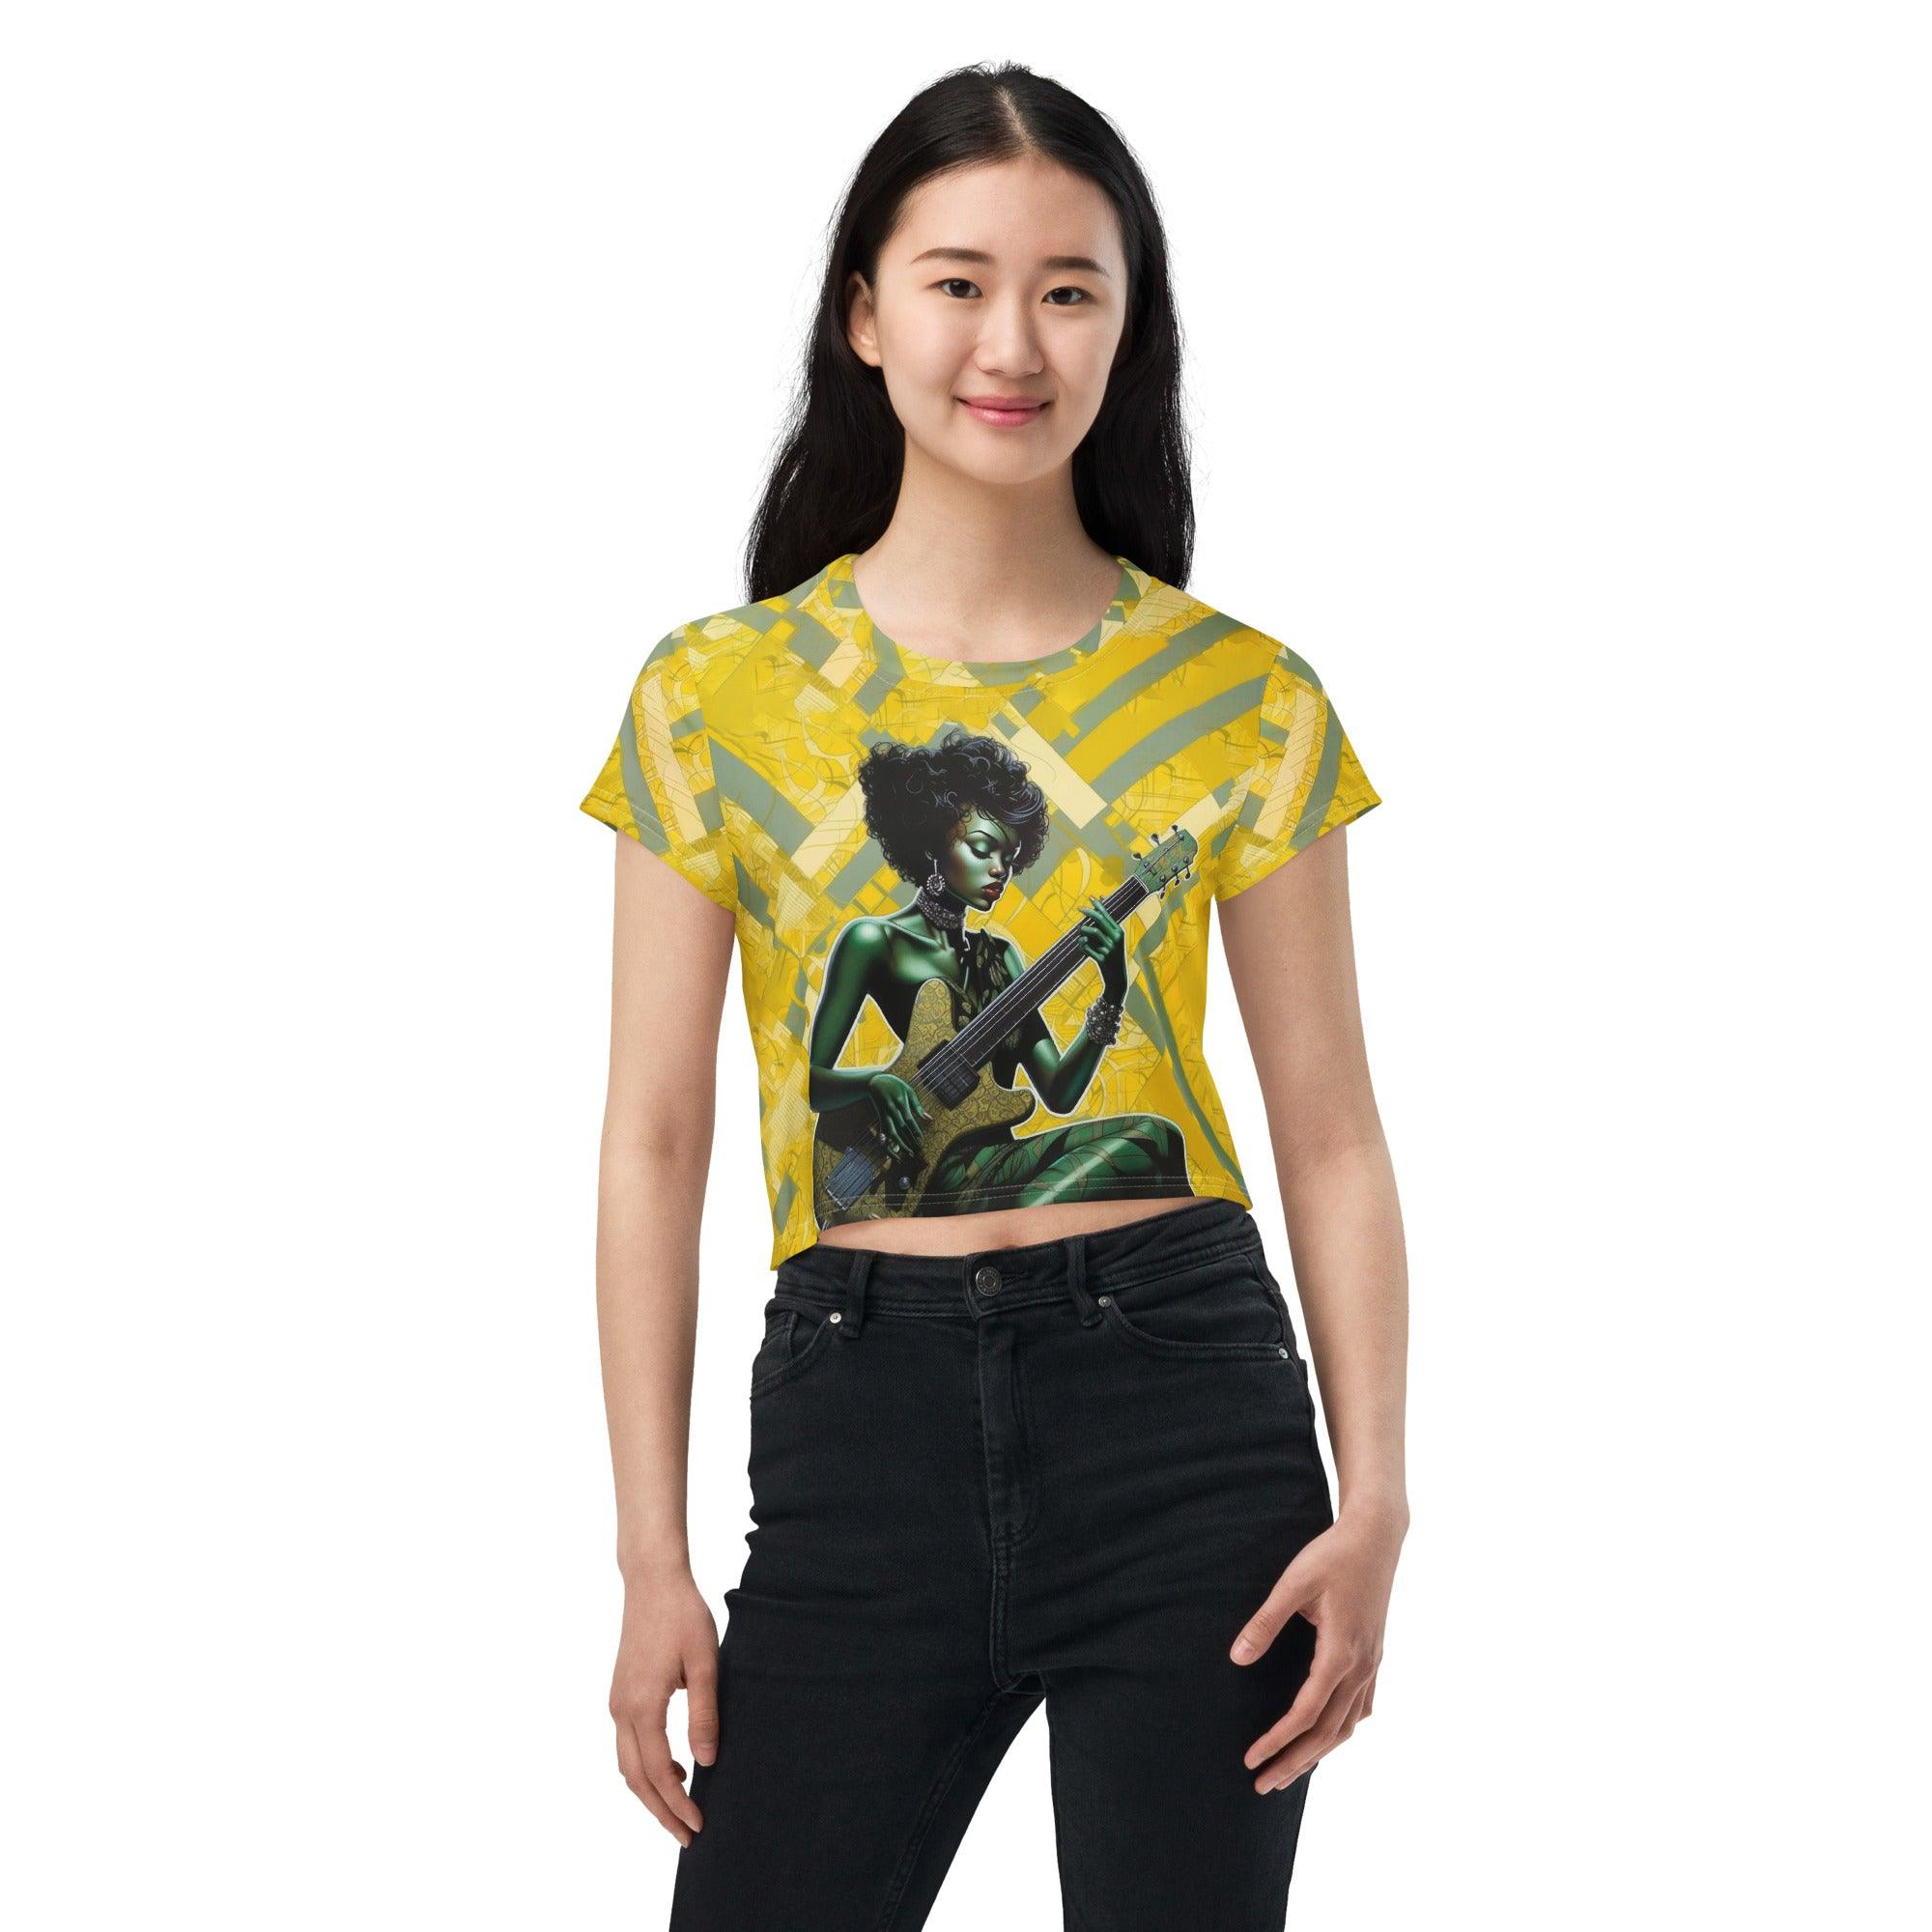 Coolest Instrument All Over Print Crop Tee Front View